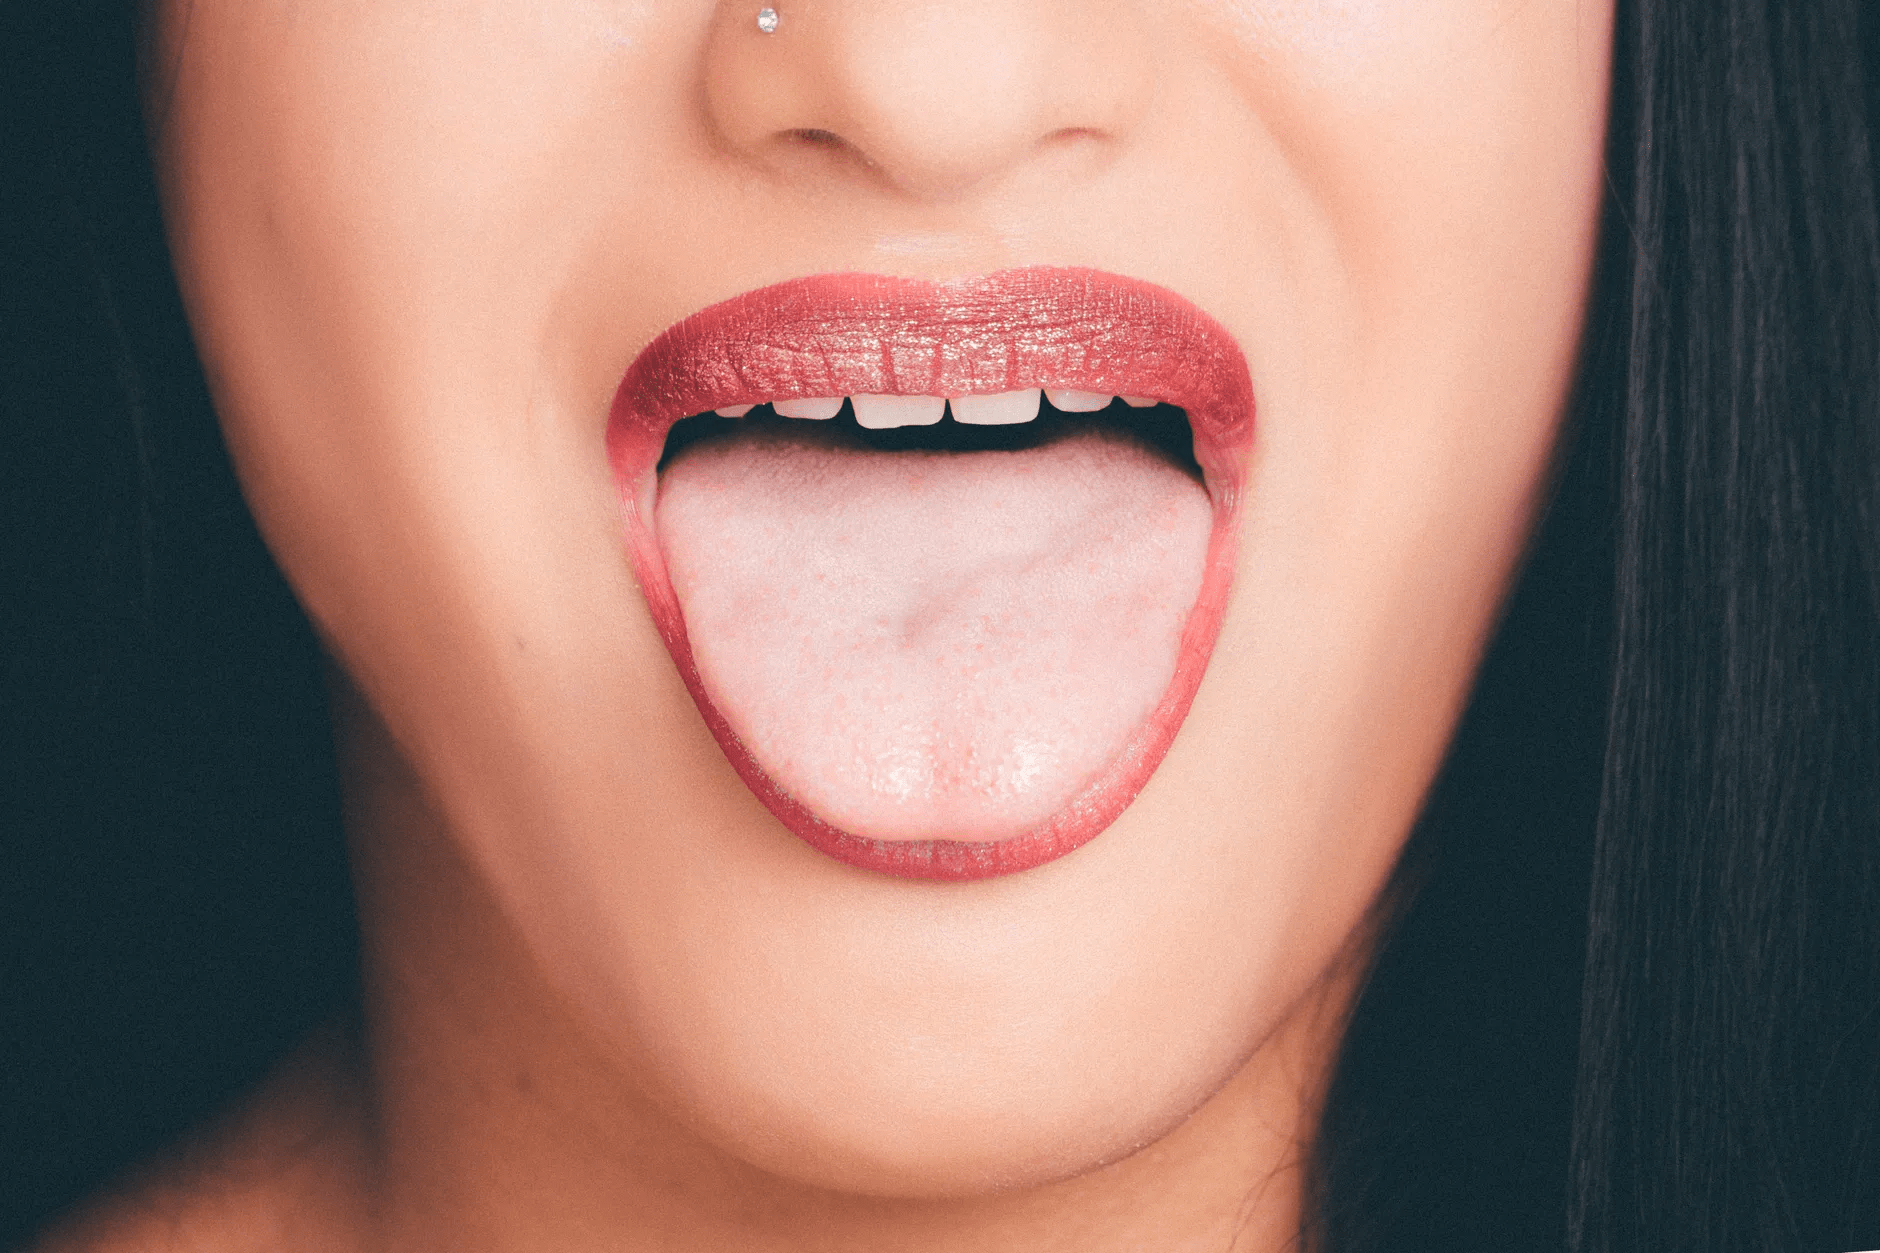 Tips-for-Keeping-Your-Tongue-Moisturized